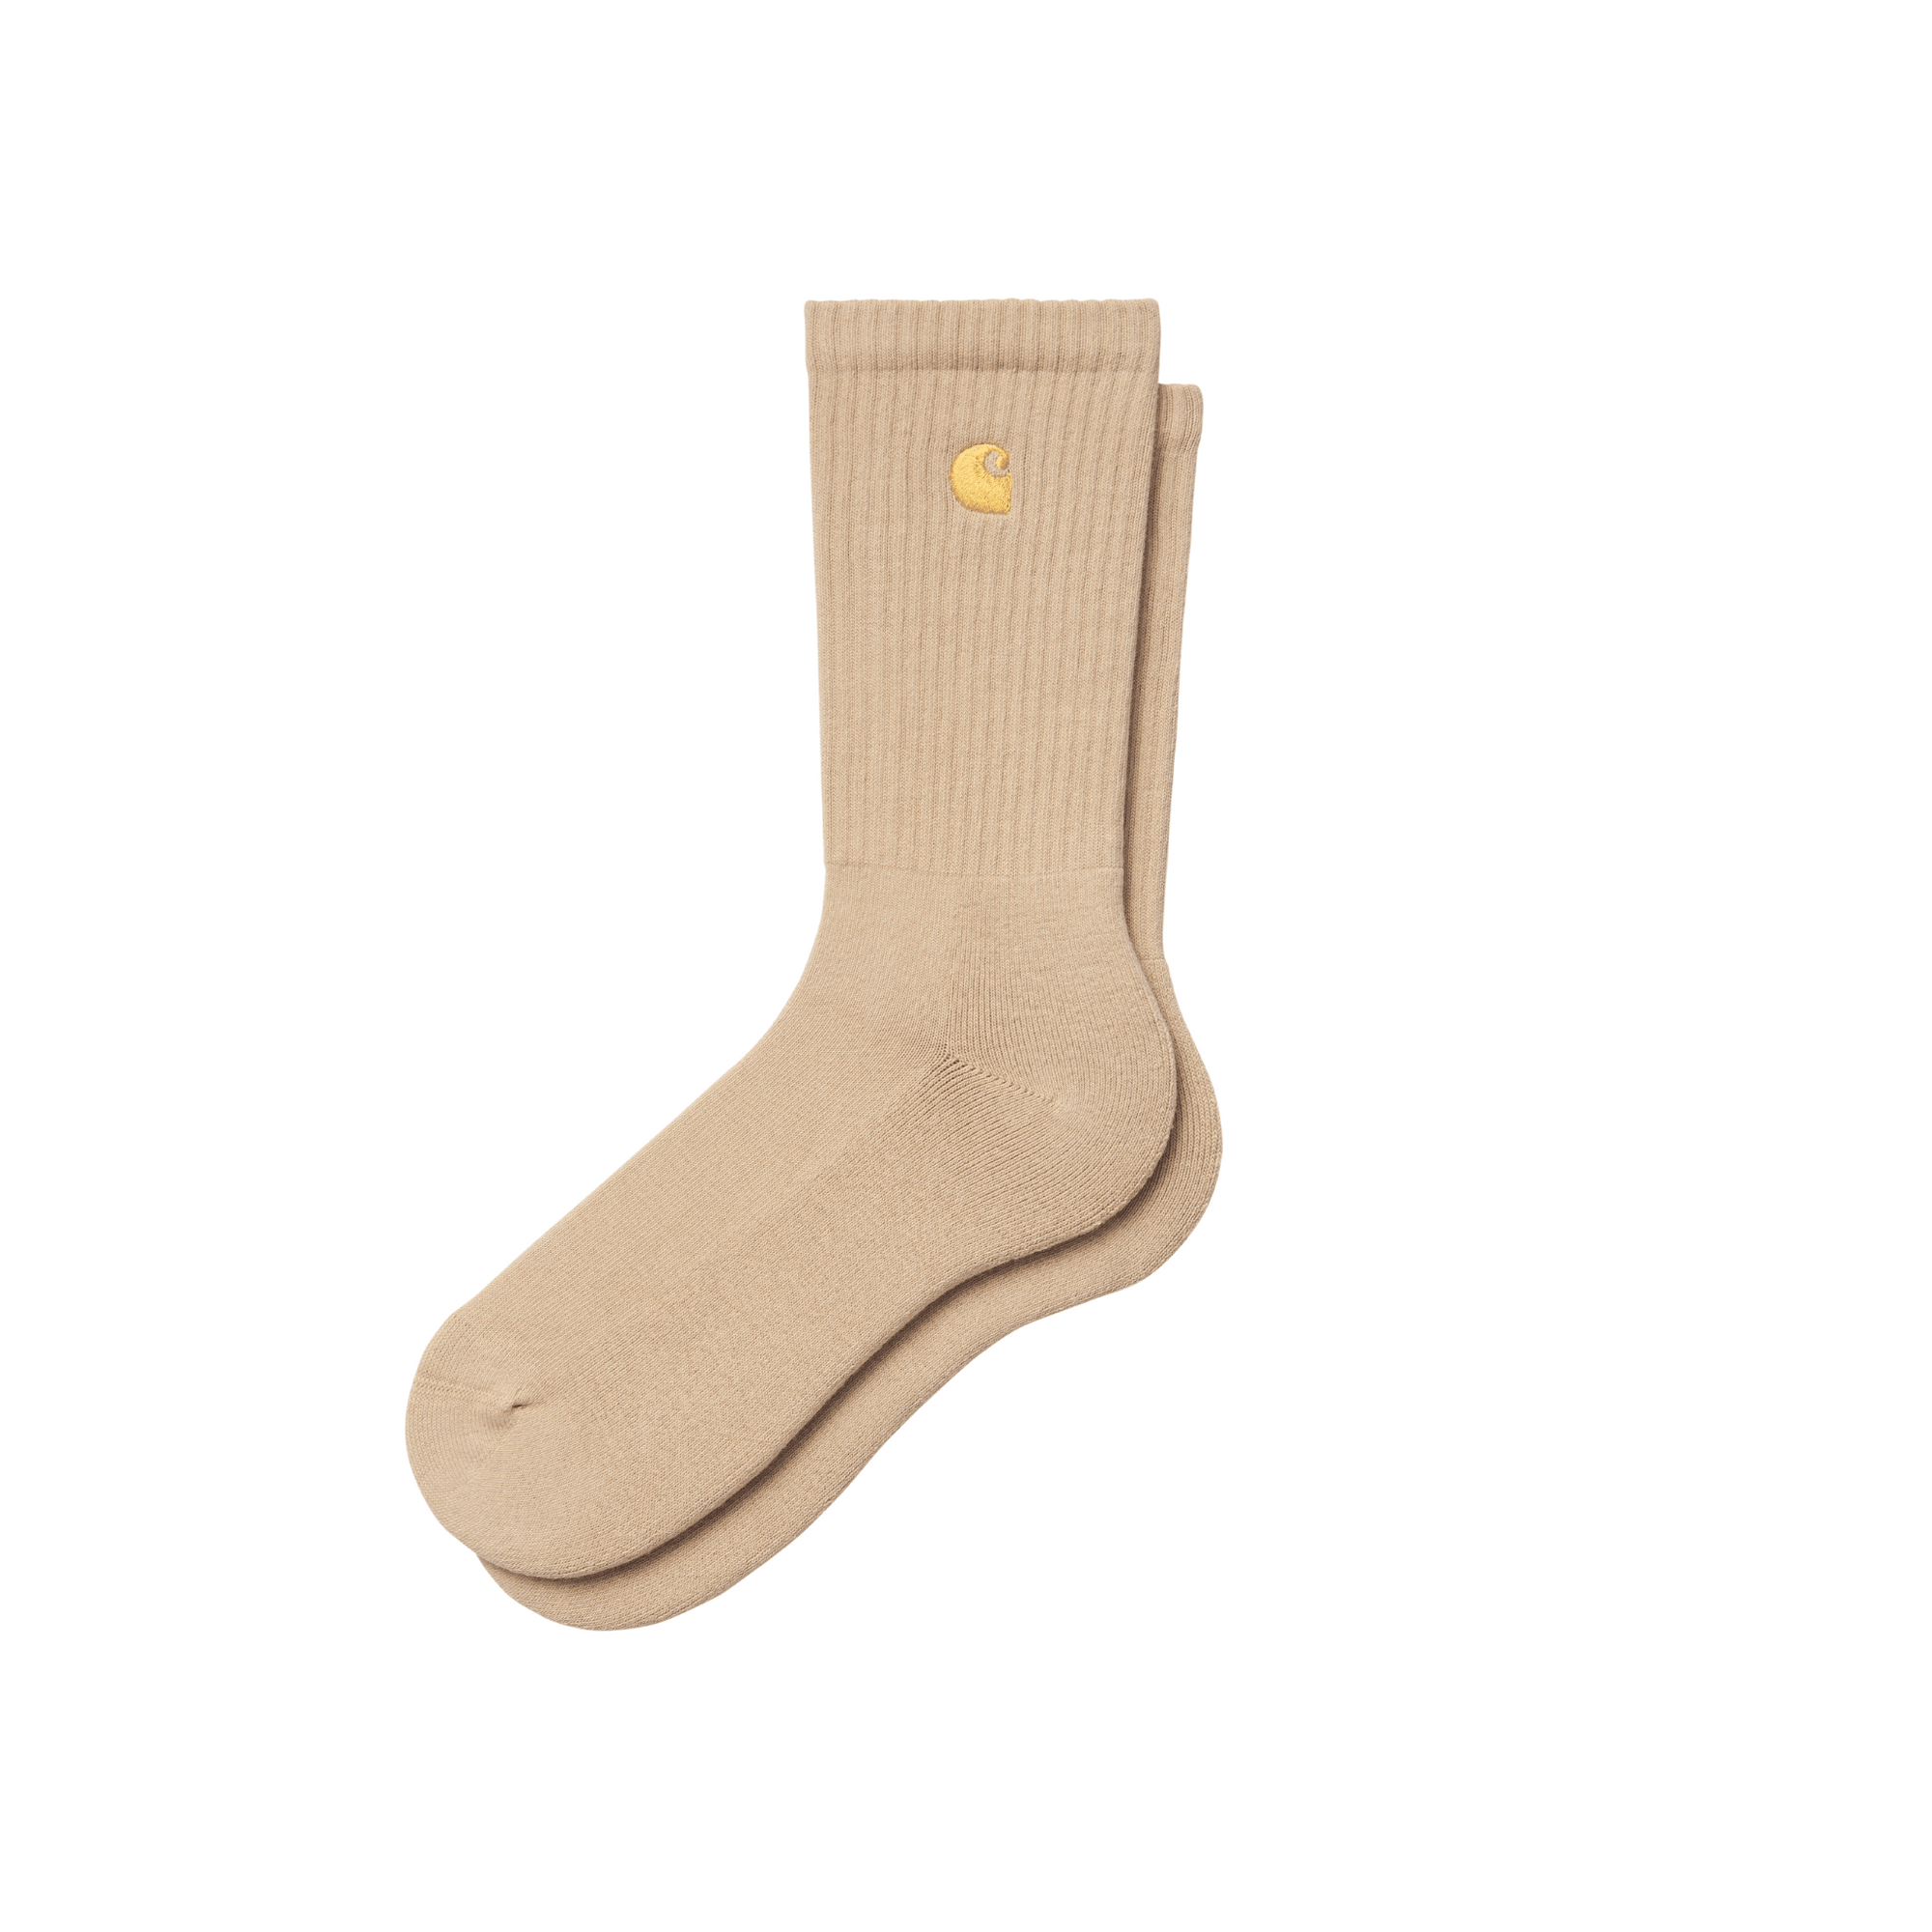 Carhartt WIP Chase Socks (sable/gold) - Blue Mountain Store